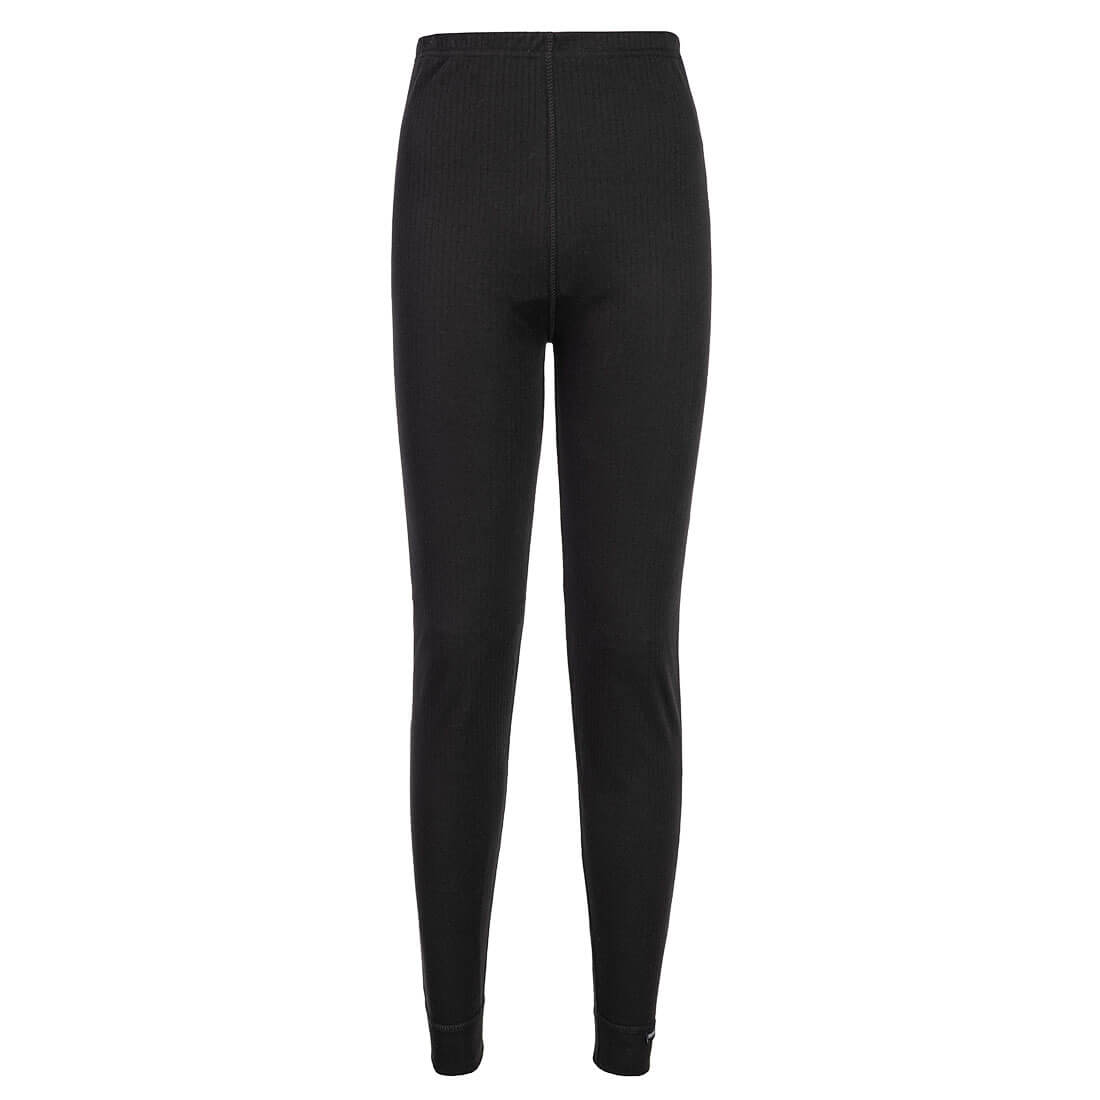 Women's Thermal Trousers  (B125)